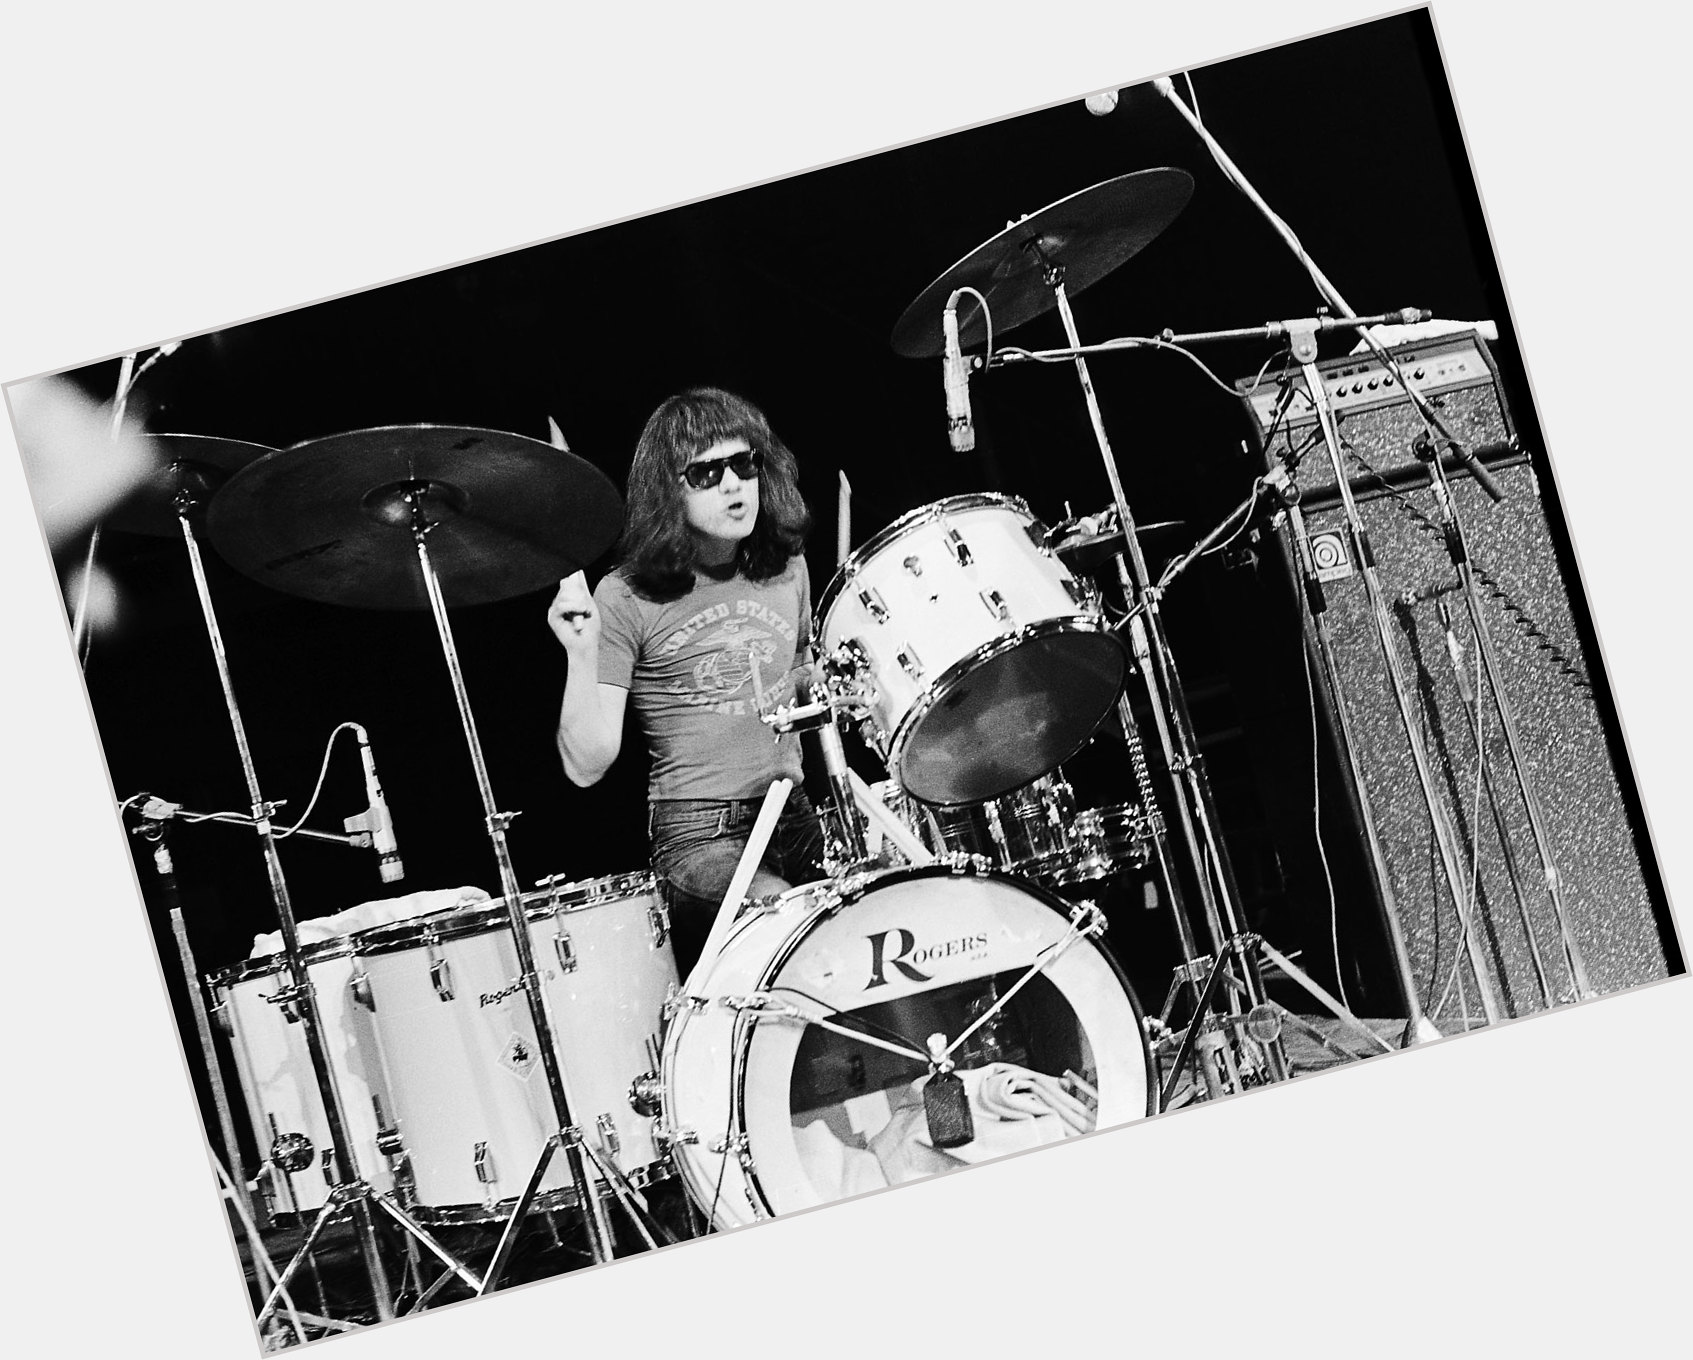 Tommy Ramone dating 2